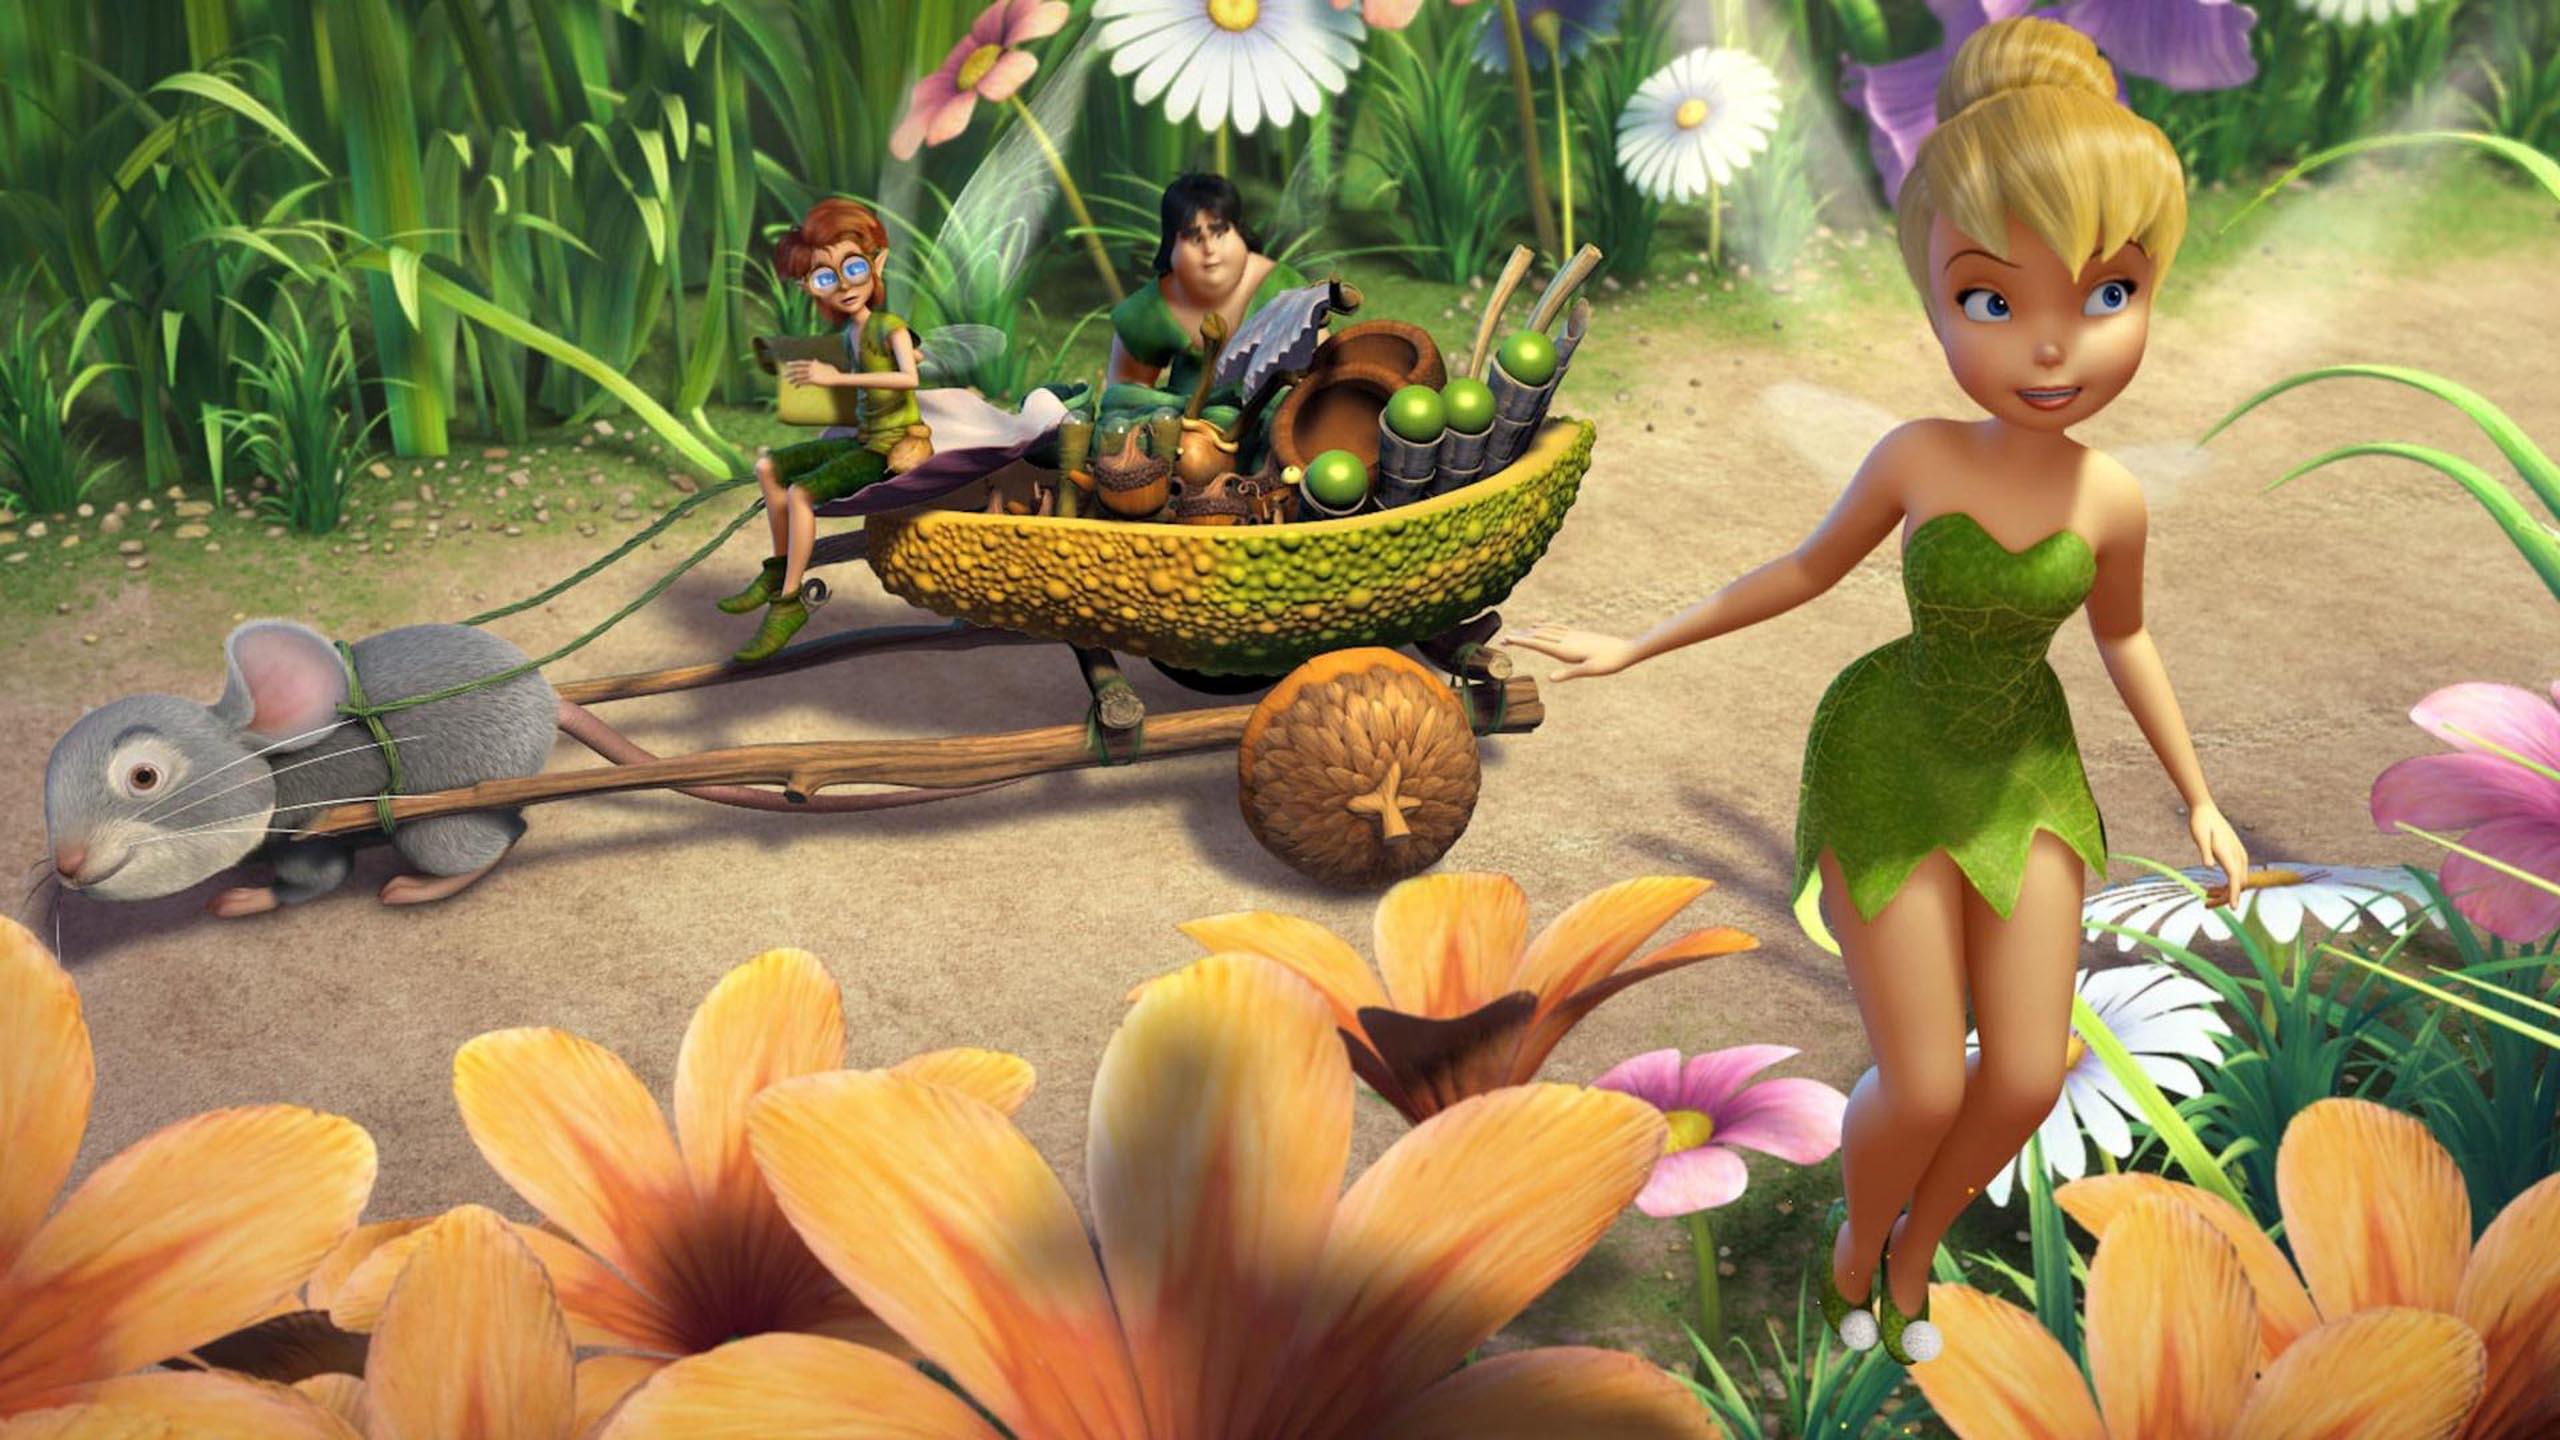 The Best Fairy Tale Tinker Bell Bobble And Clank Full HD Wallpaper